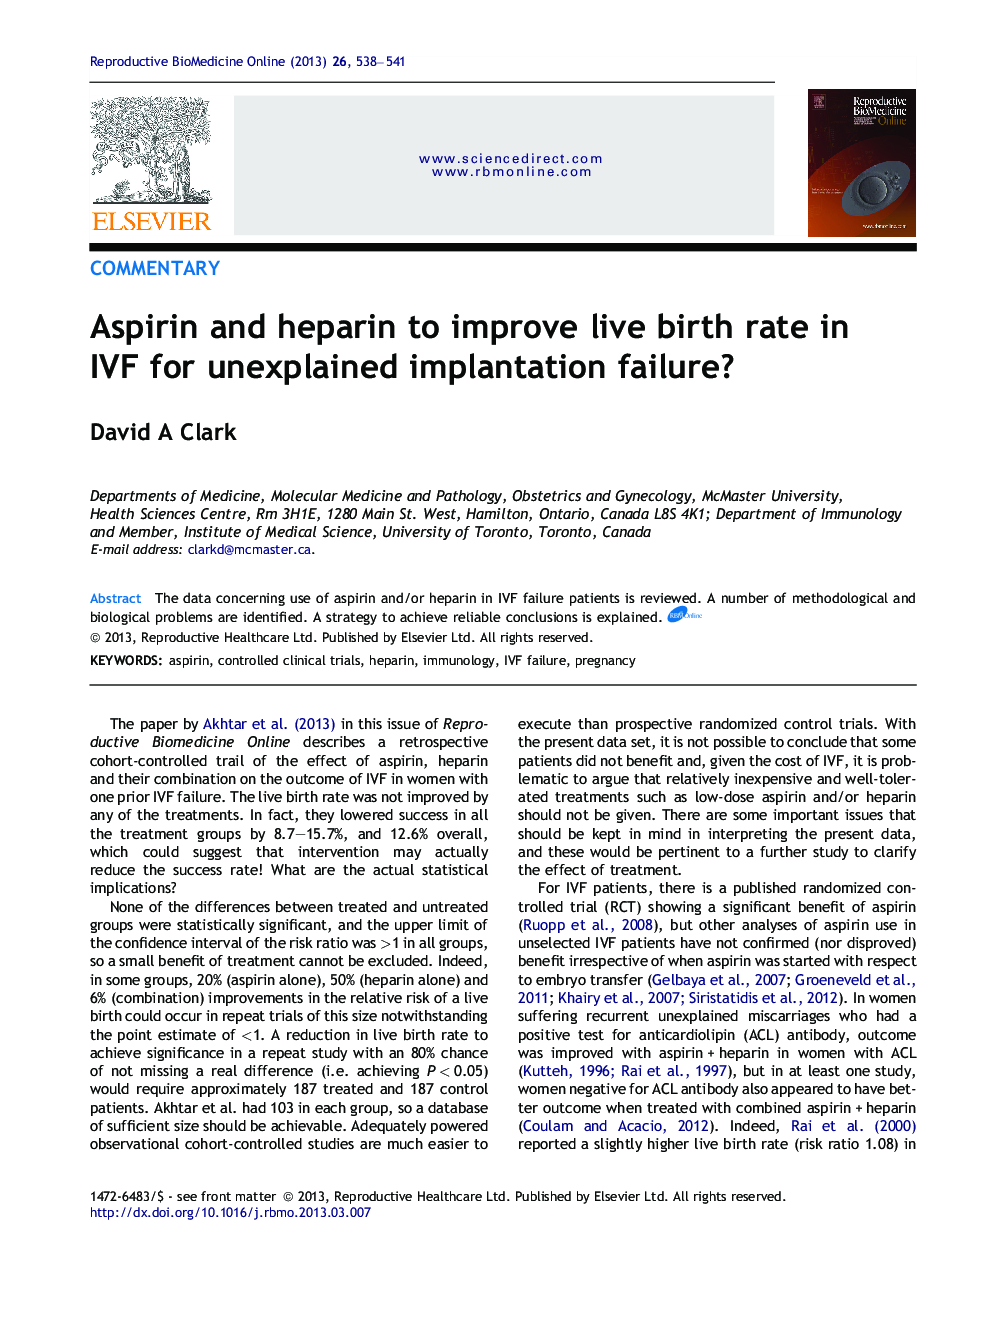 Aspirin and heparin to improve live birth rate in IVF for unexplained implantation failure?